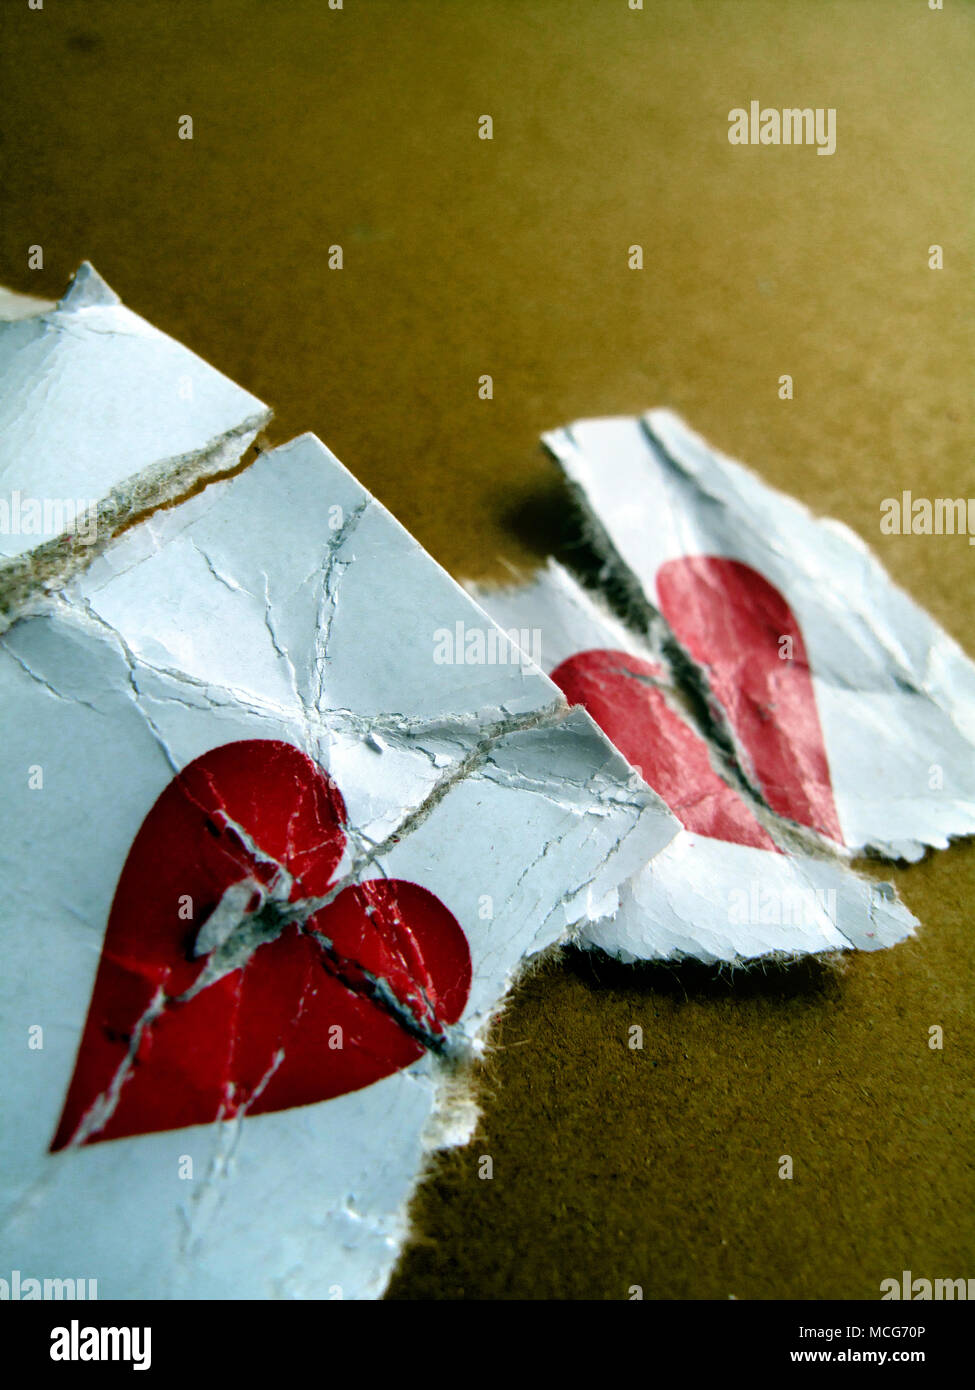 Section of a  playing card showing two broken red hearts. Stock Photo